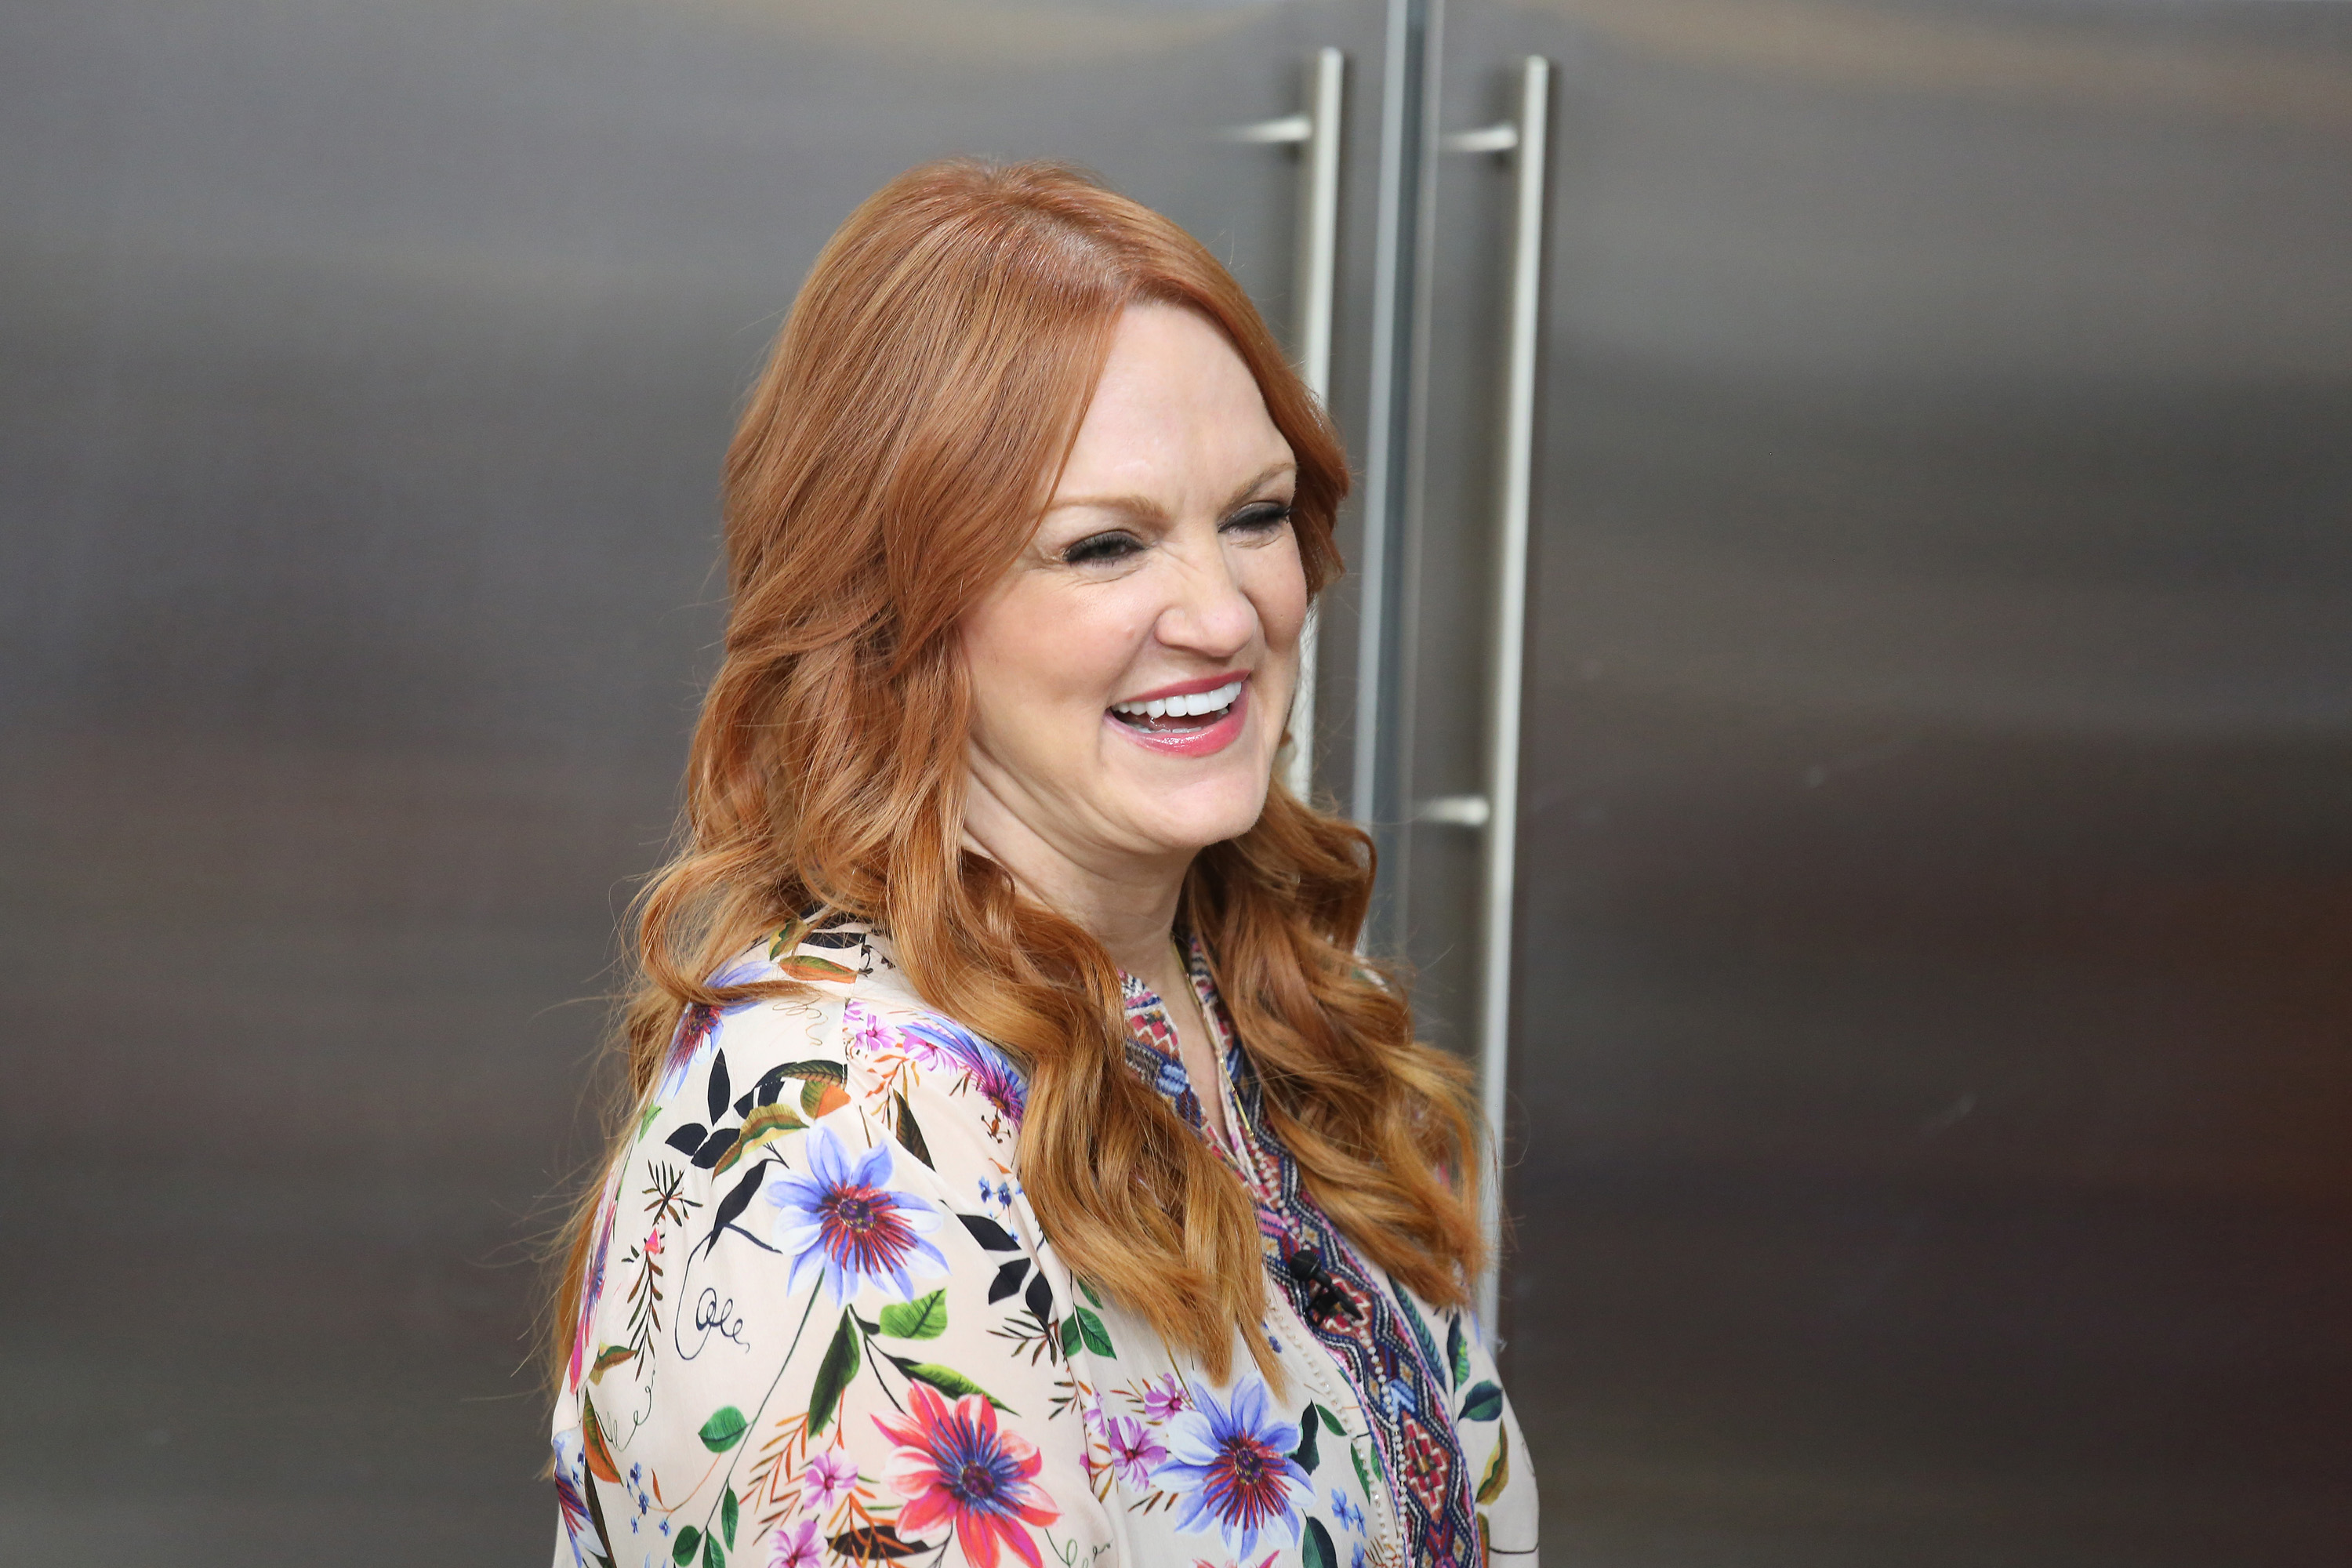 Celebrity chef Ree Drummond wears a multi-pattern print blouse in this photograph.